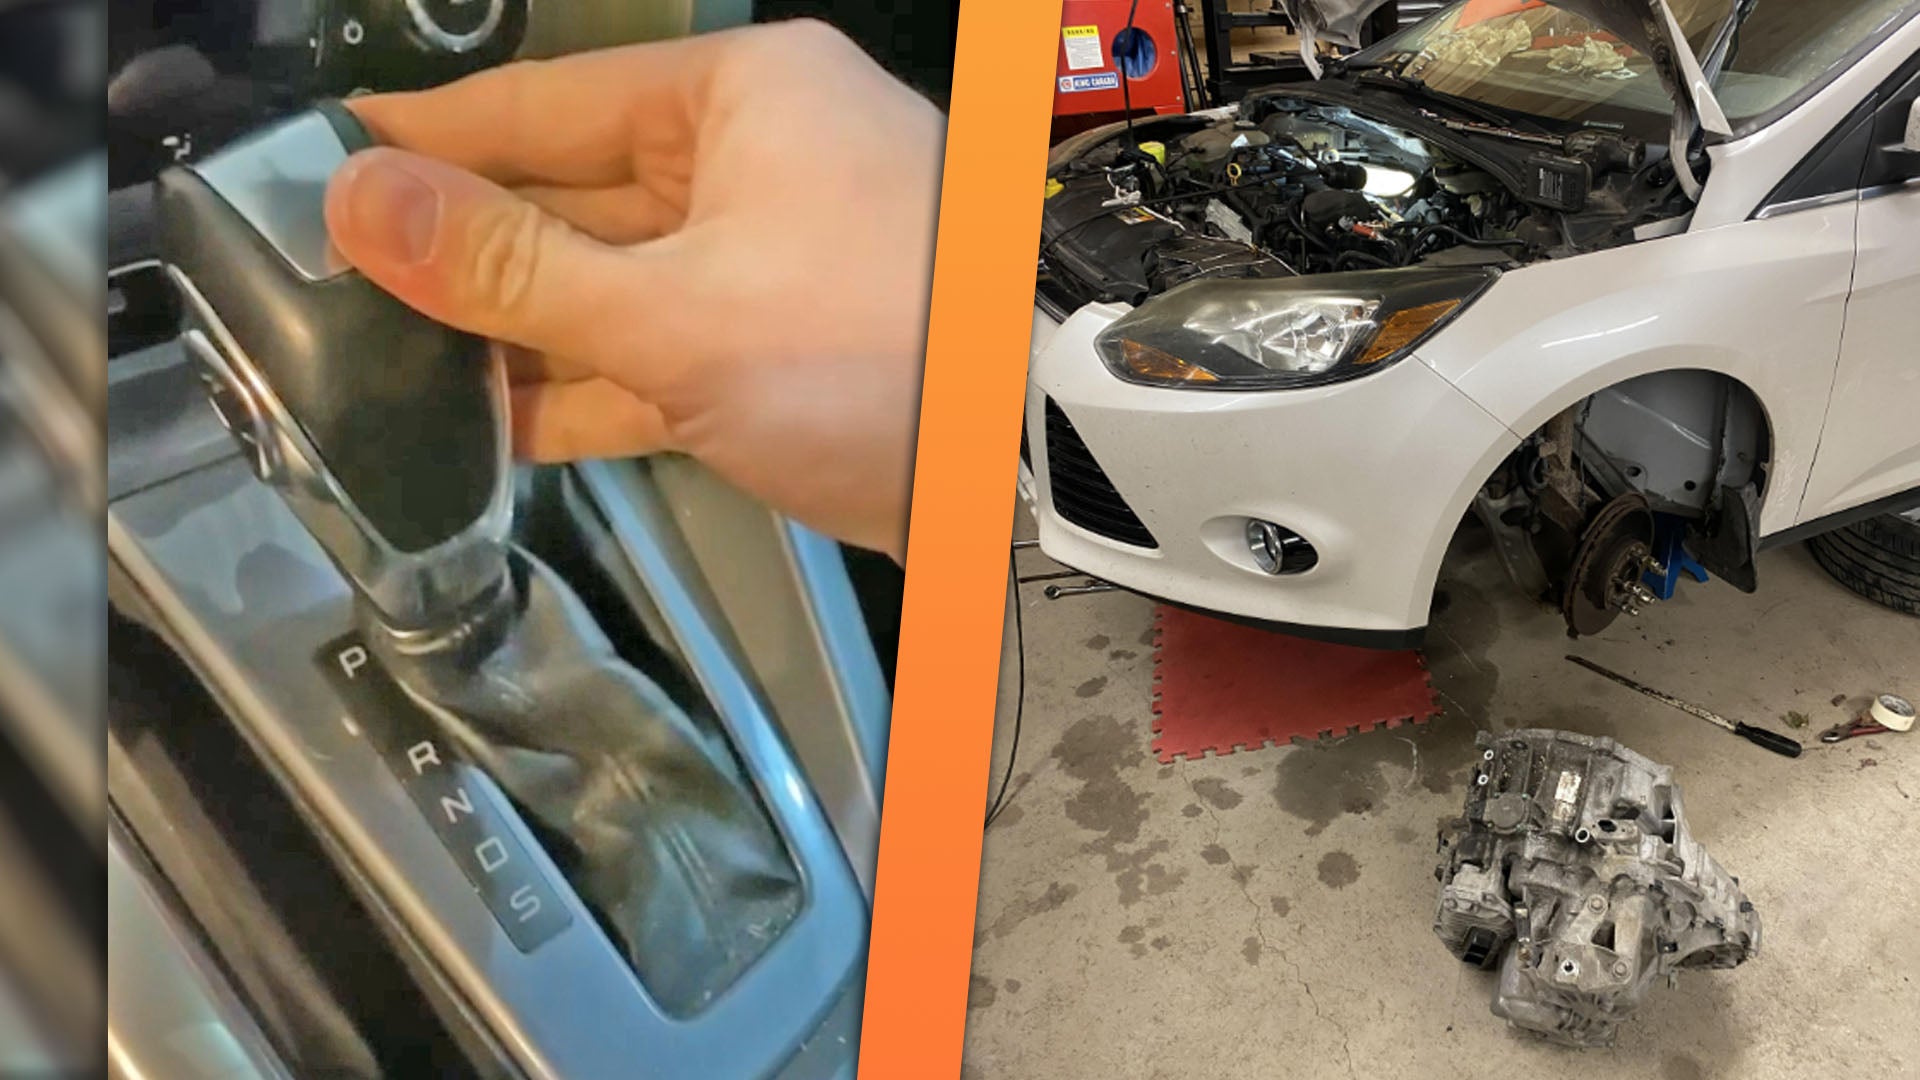 Manual-Swapped 2013 Ford Focus With Automatic Shifter Is Confusing the Internet